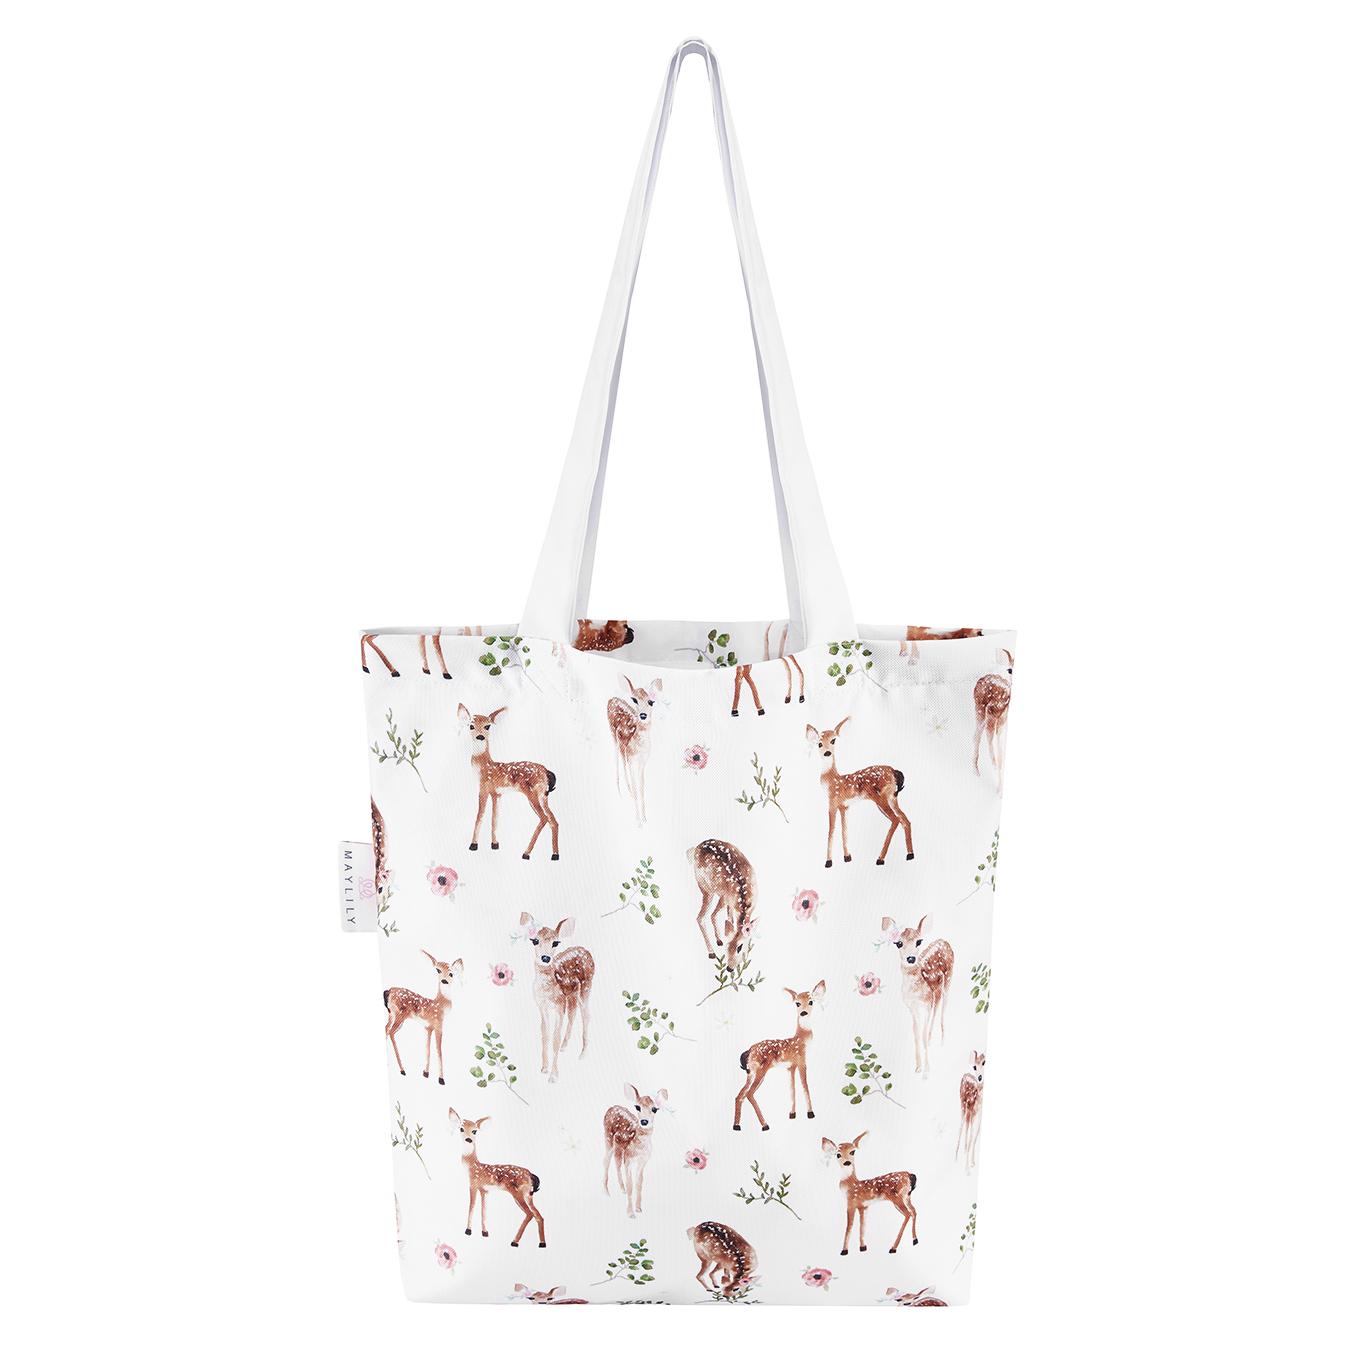 Tote bag - Fawns